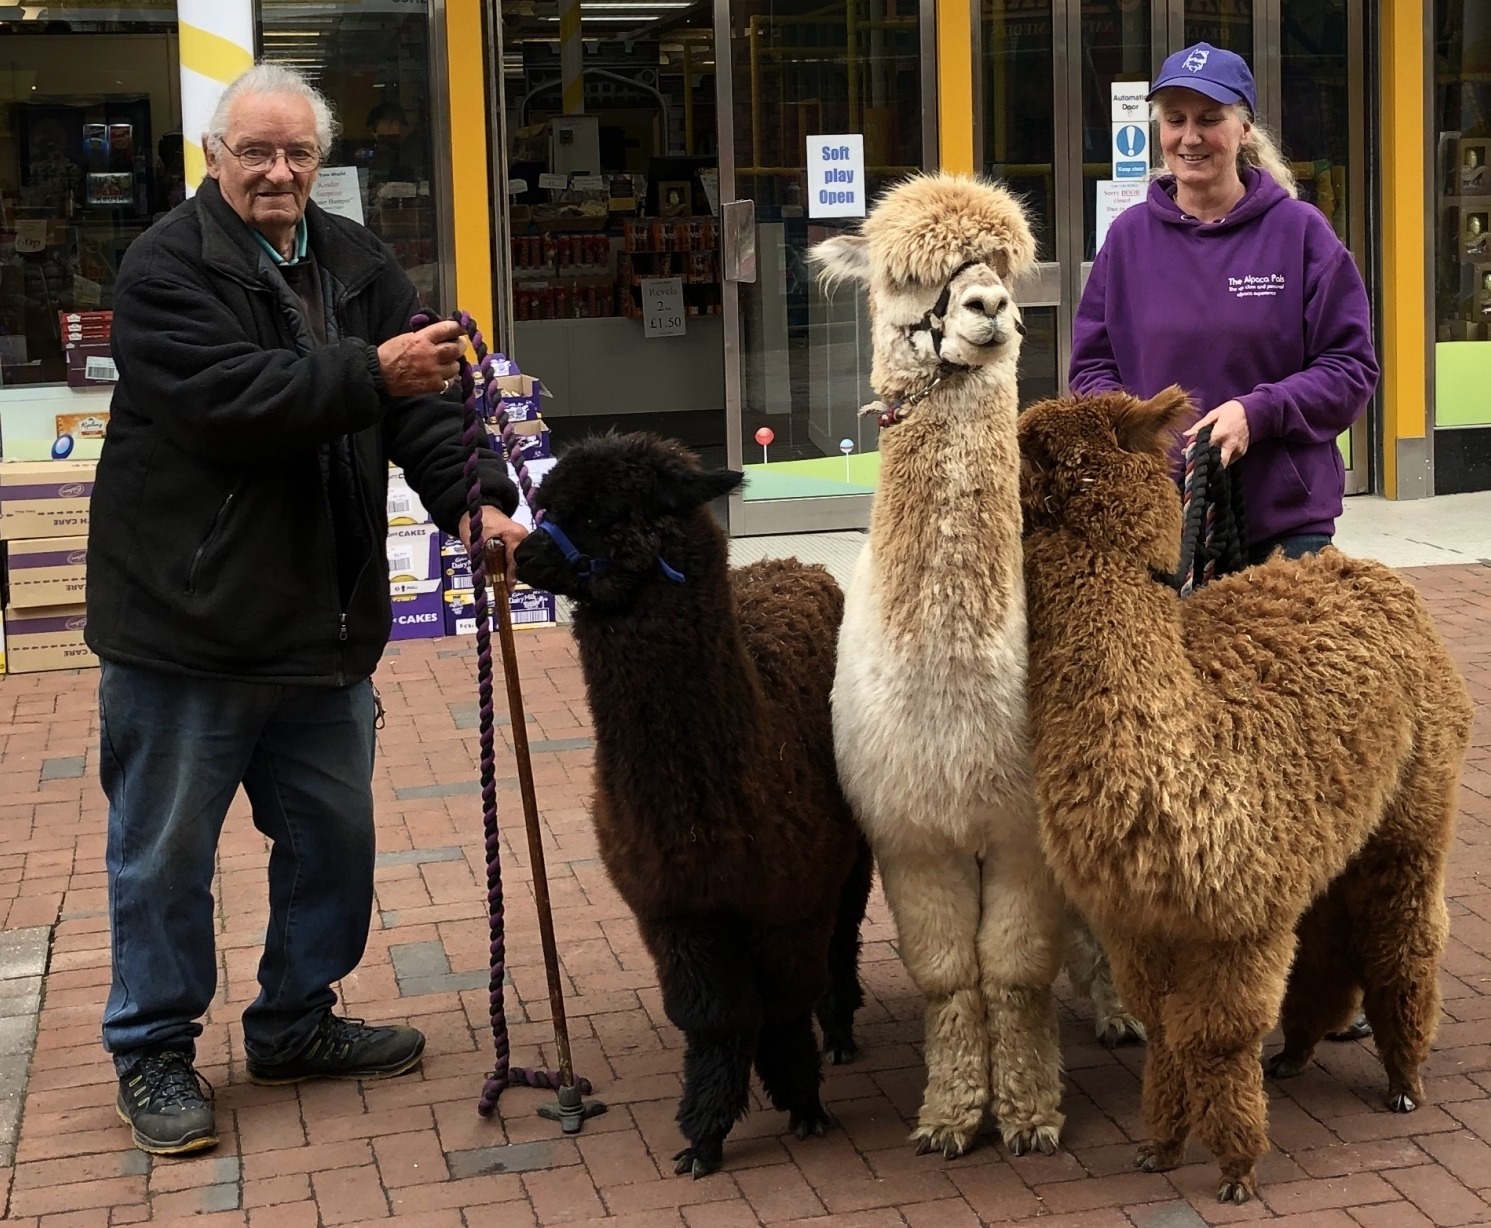 The Yum Yum World store welcomes The Alpaca Pals to their shop